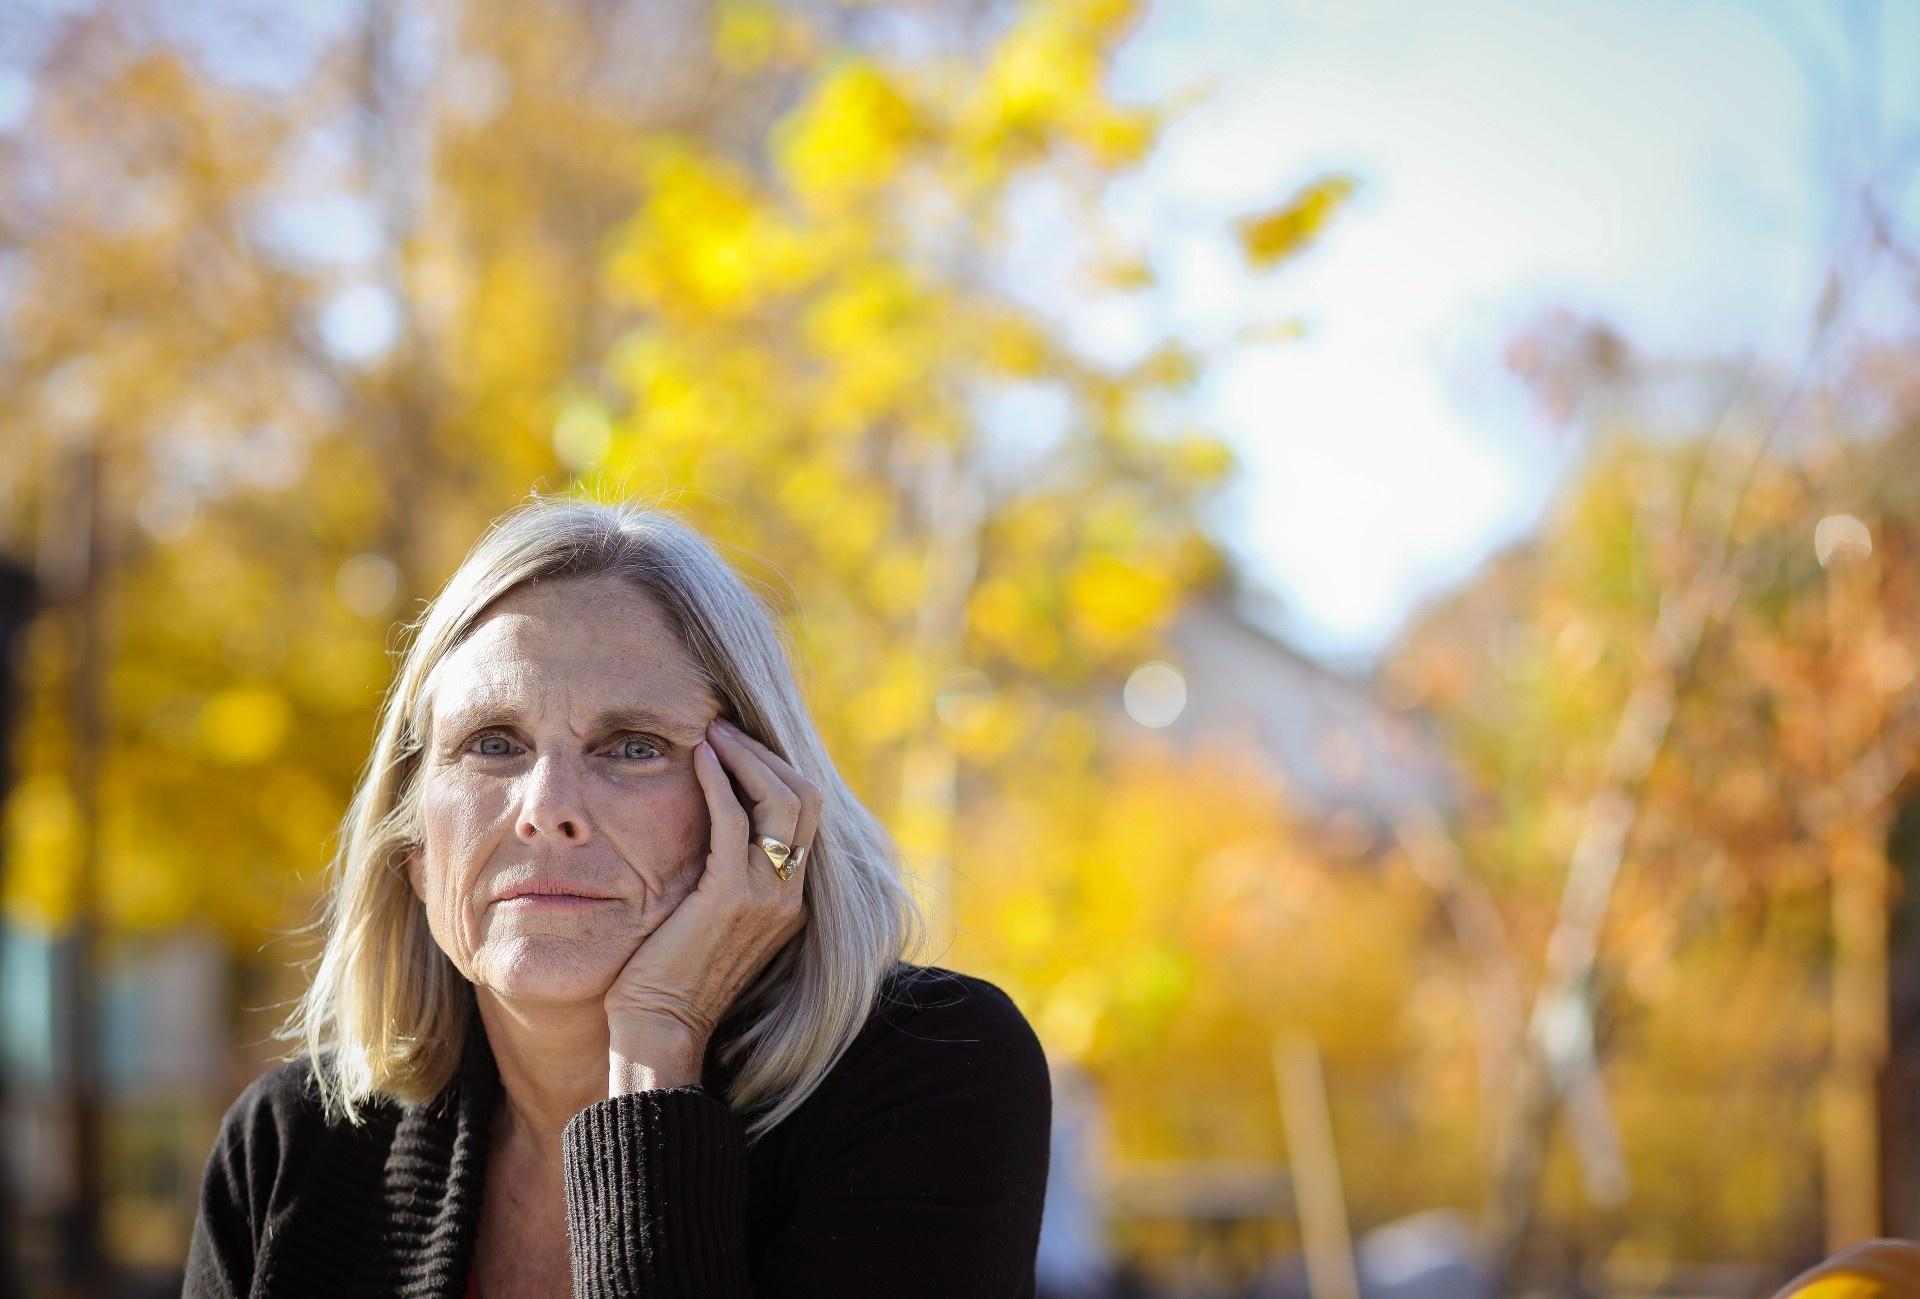 Nancy VanDeMark, former head of the Colorado Office of Behavioral Health, questions the lack of state oversight of community mental health centers, especially in a time of crisis.